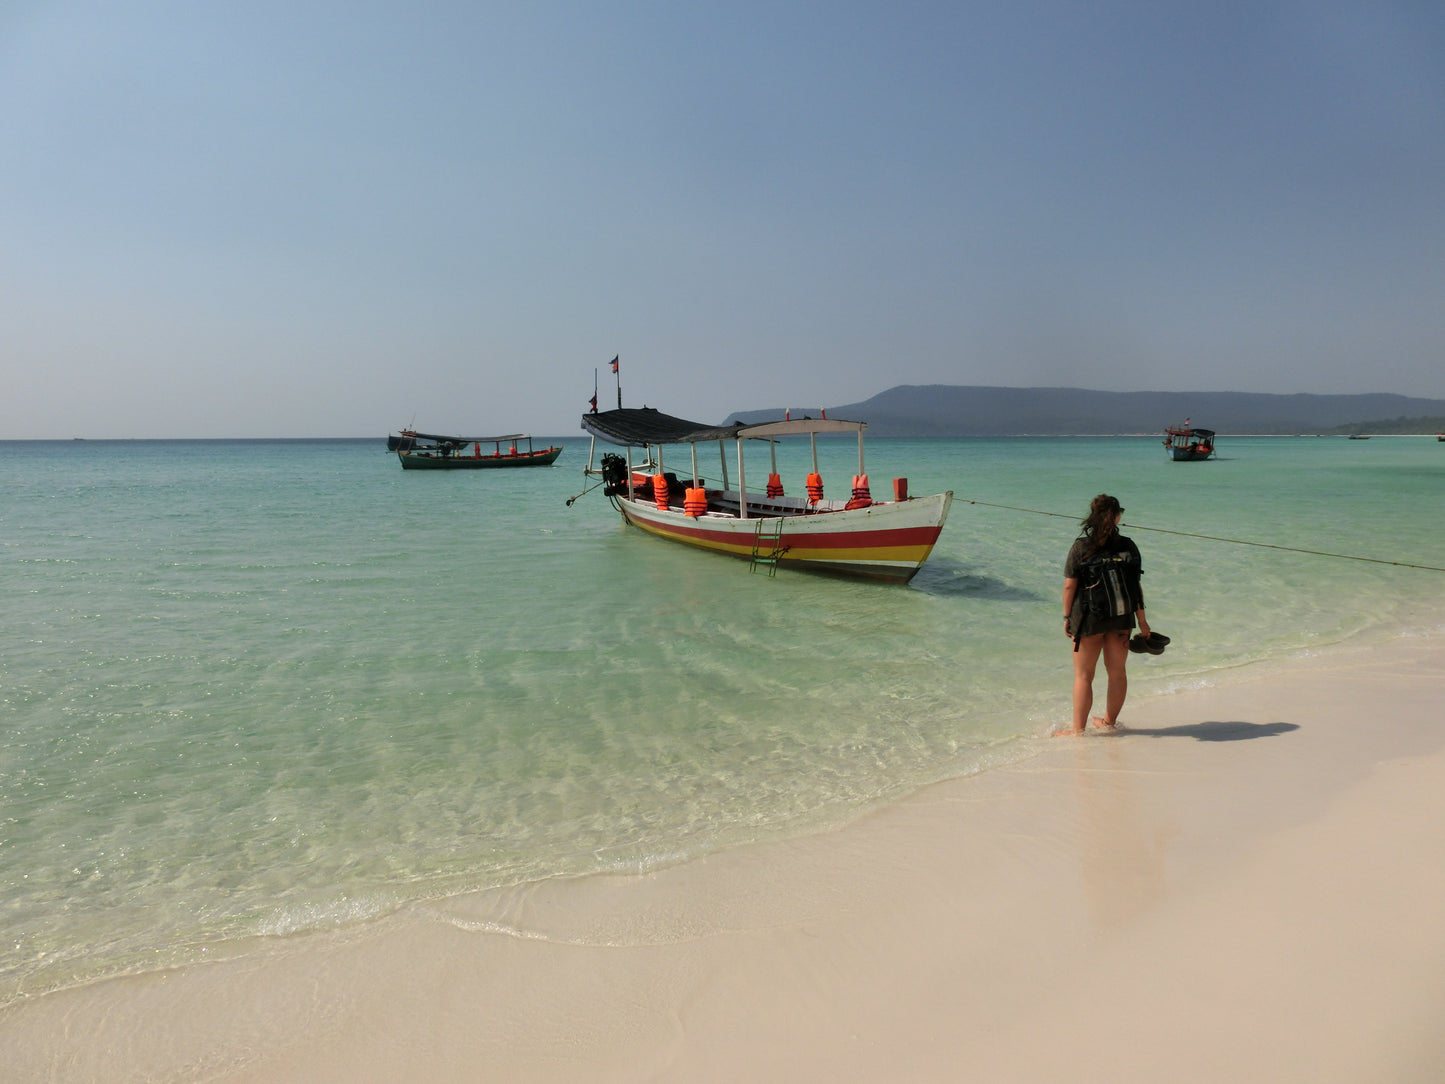 A6C: (3 Days) Koh Rong Island, Cambodia: A Tropical Paradise Adventure